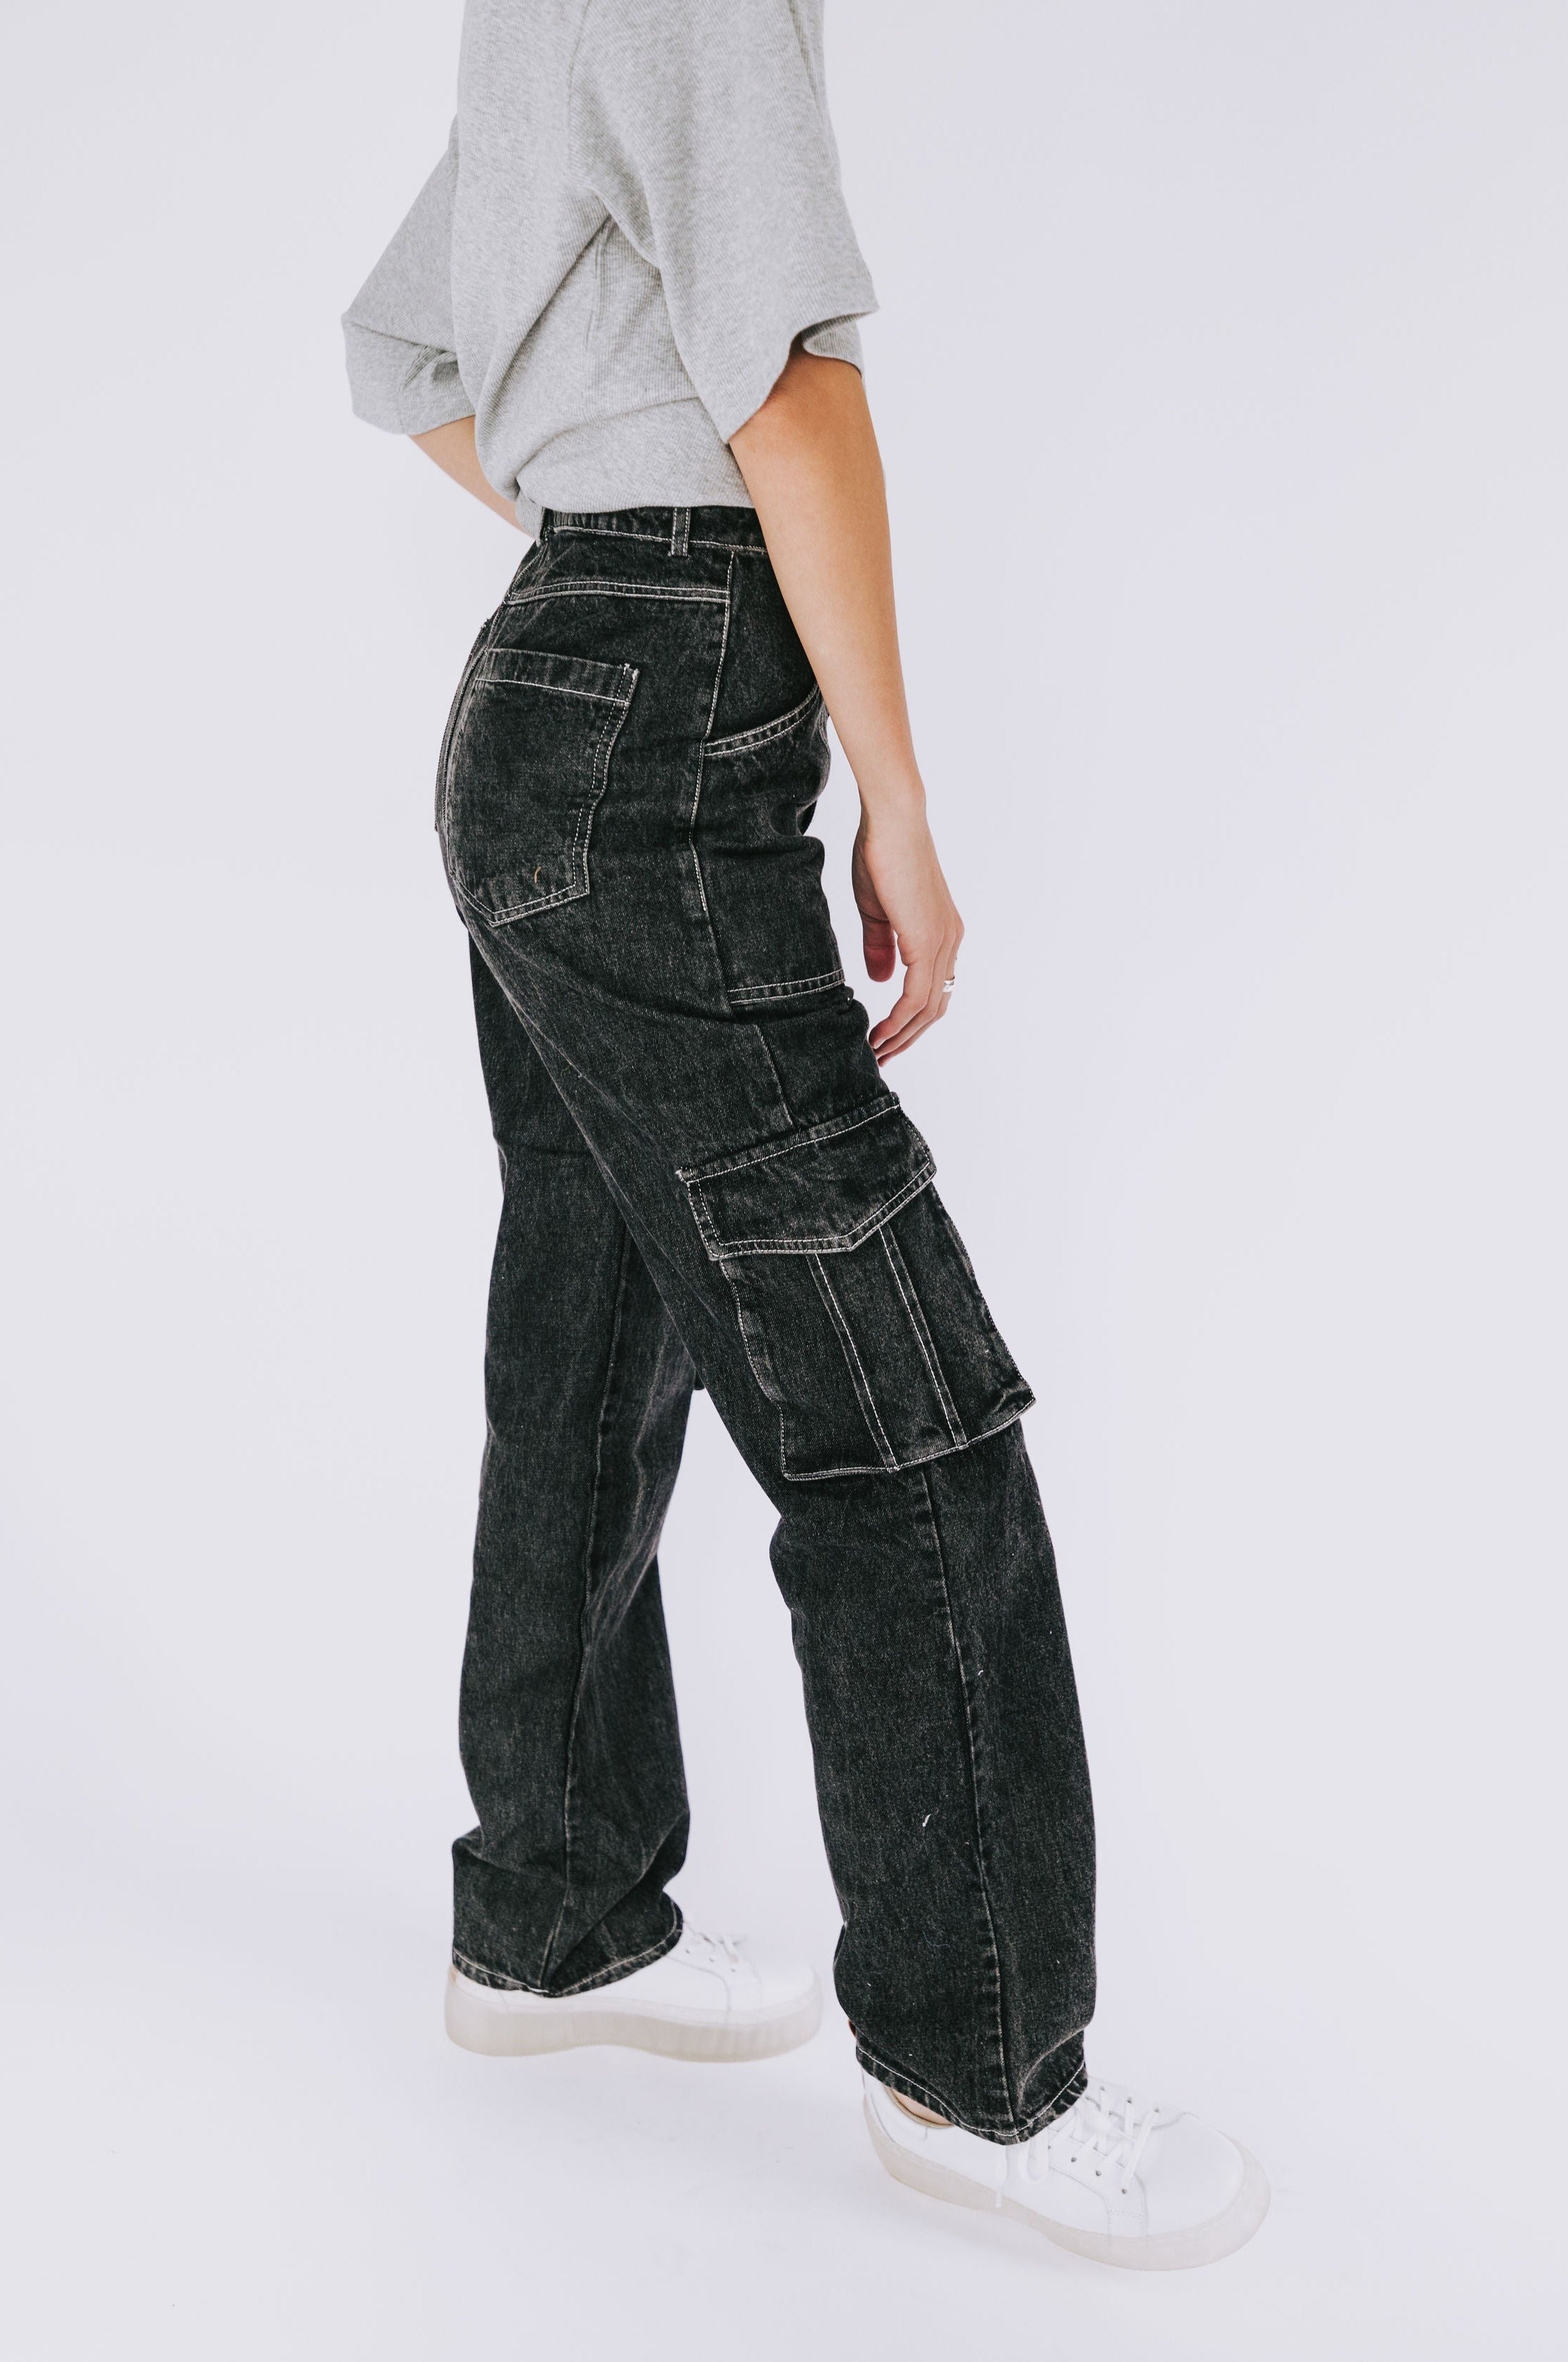 Find Strength Cargo Jeans - 3 Colors!